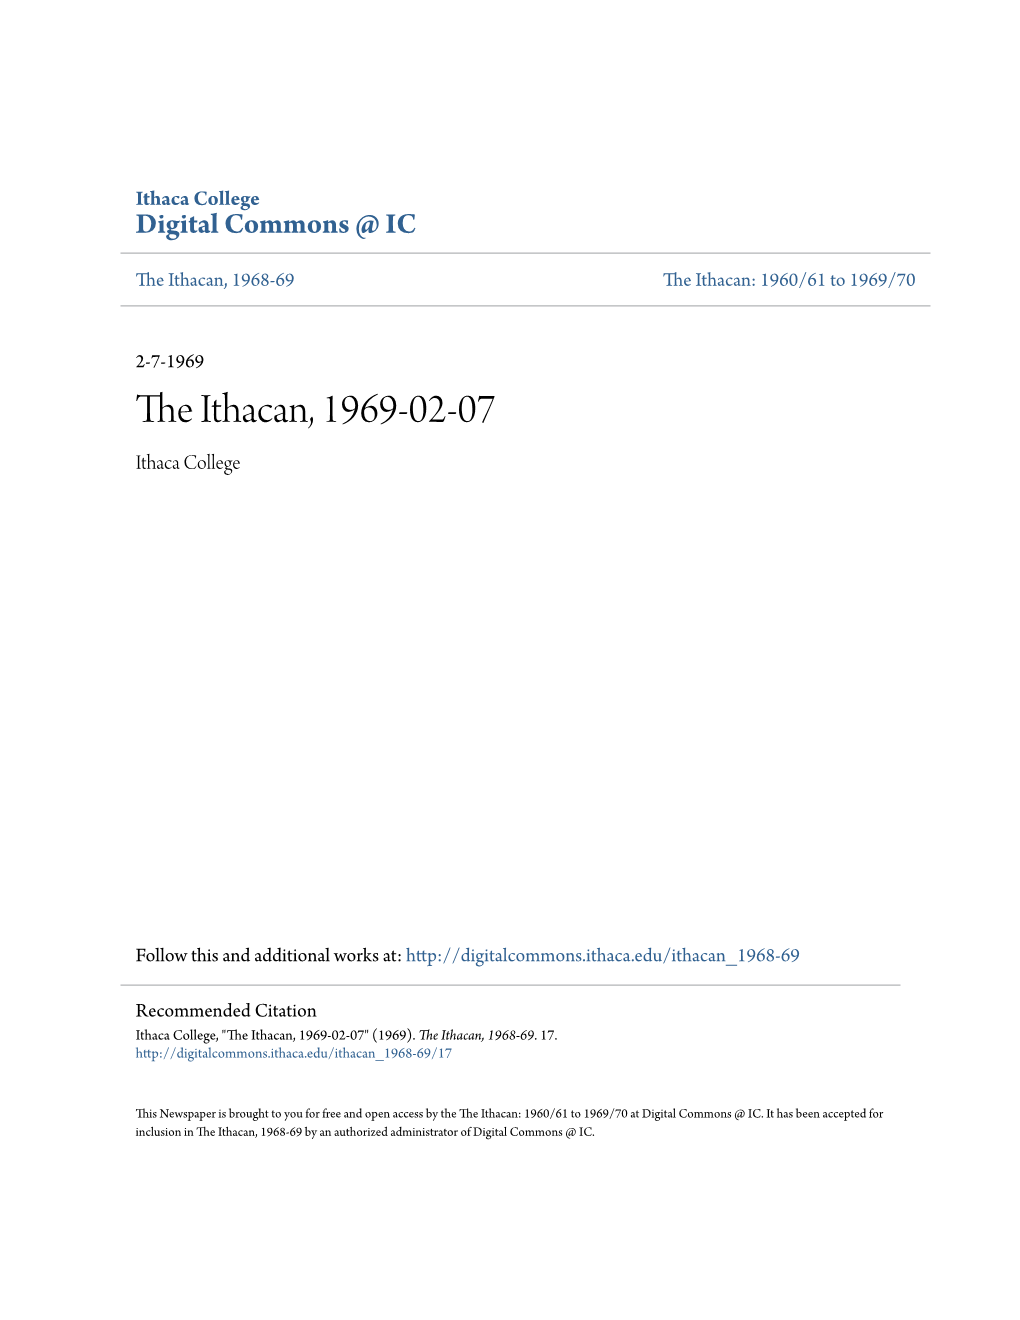 The Ithacan, 1969-02-07